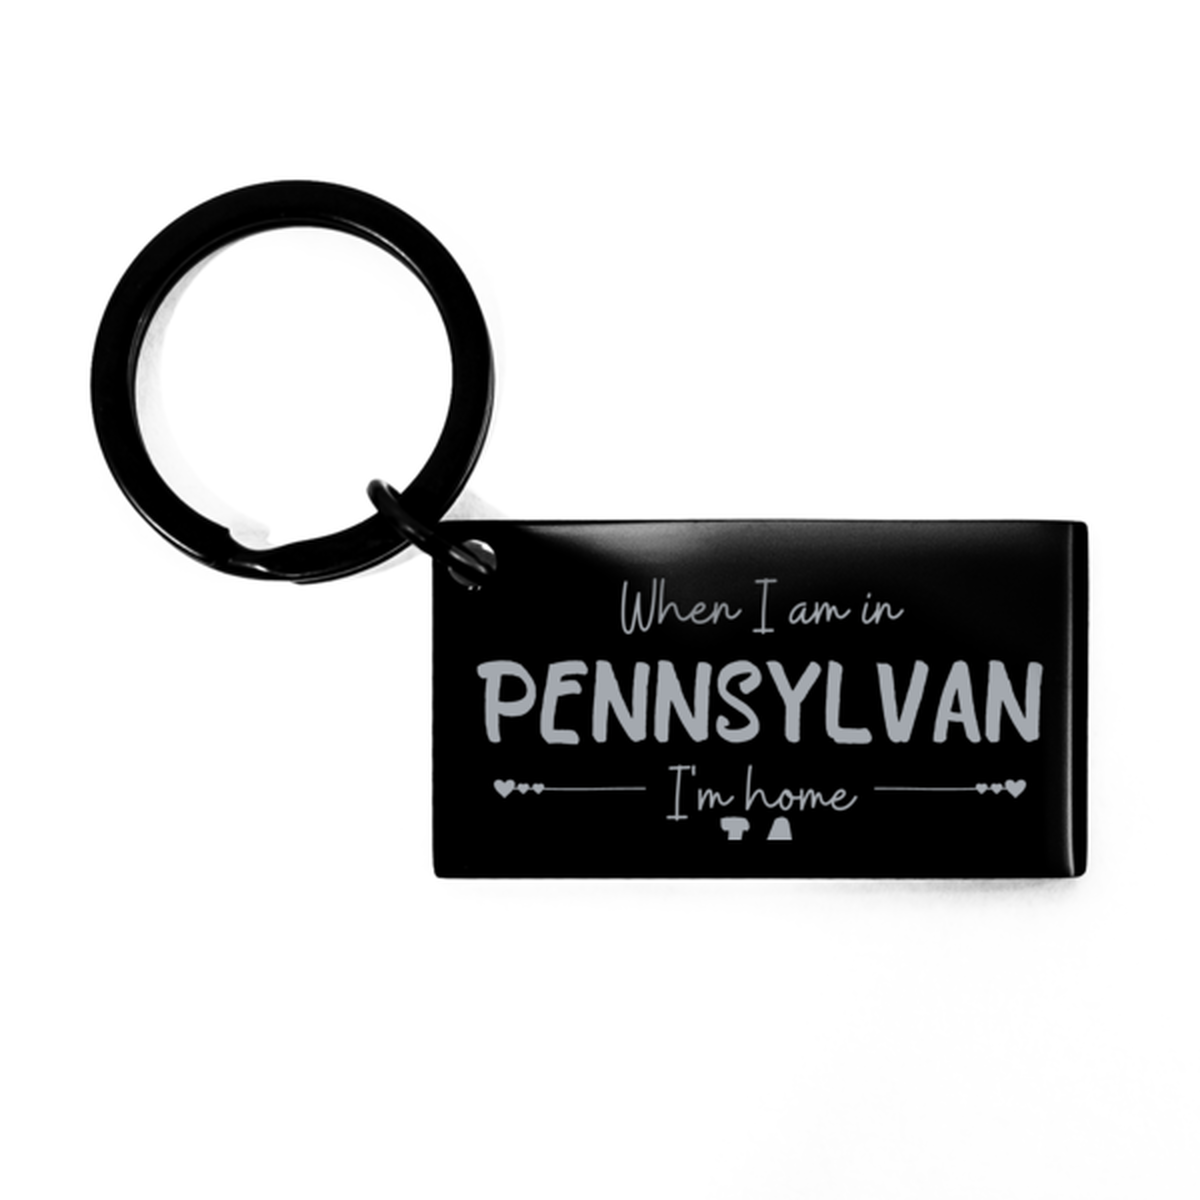 When I am in Pennsylvania I'm home Keychain, Cheap Gifts For Pennsylvania, State Pennsylvania Birthday Gifts for Friends Coworker